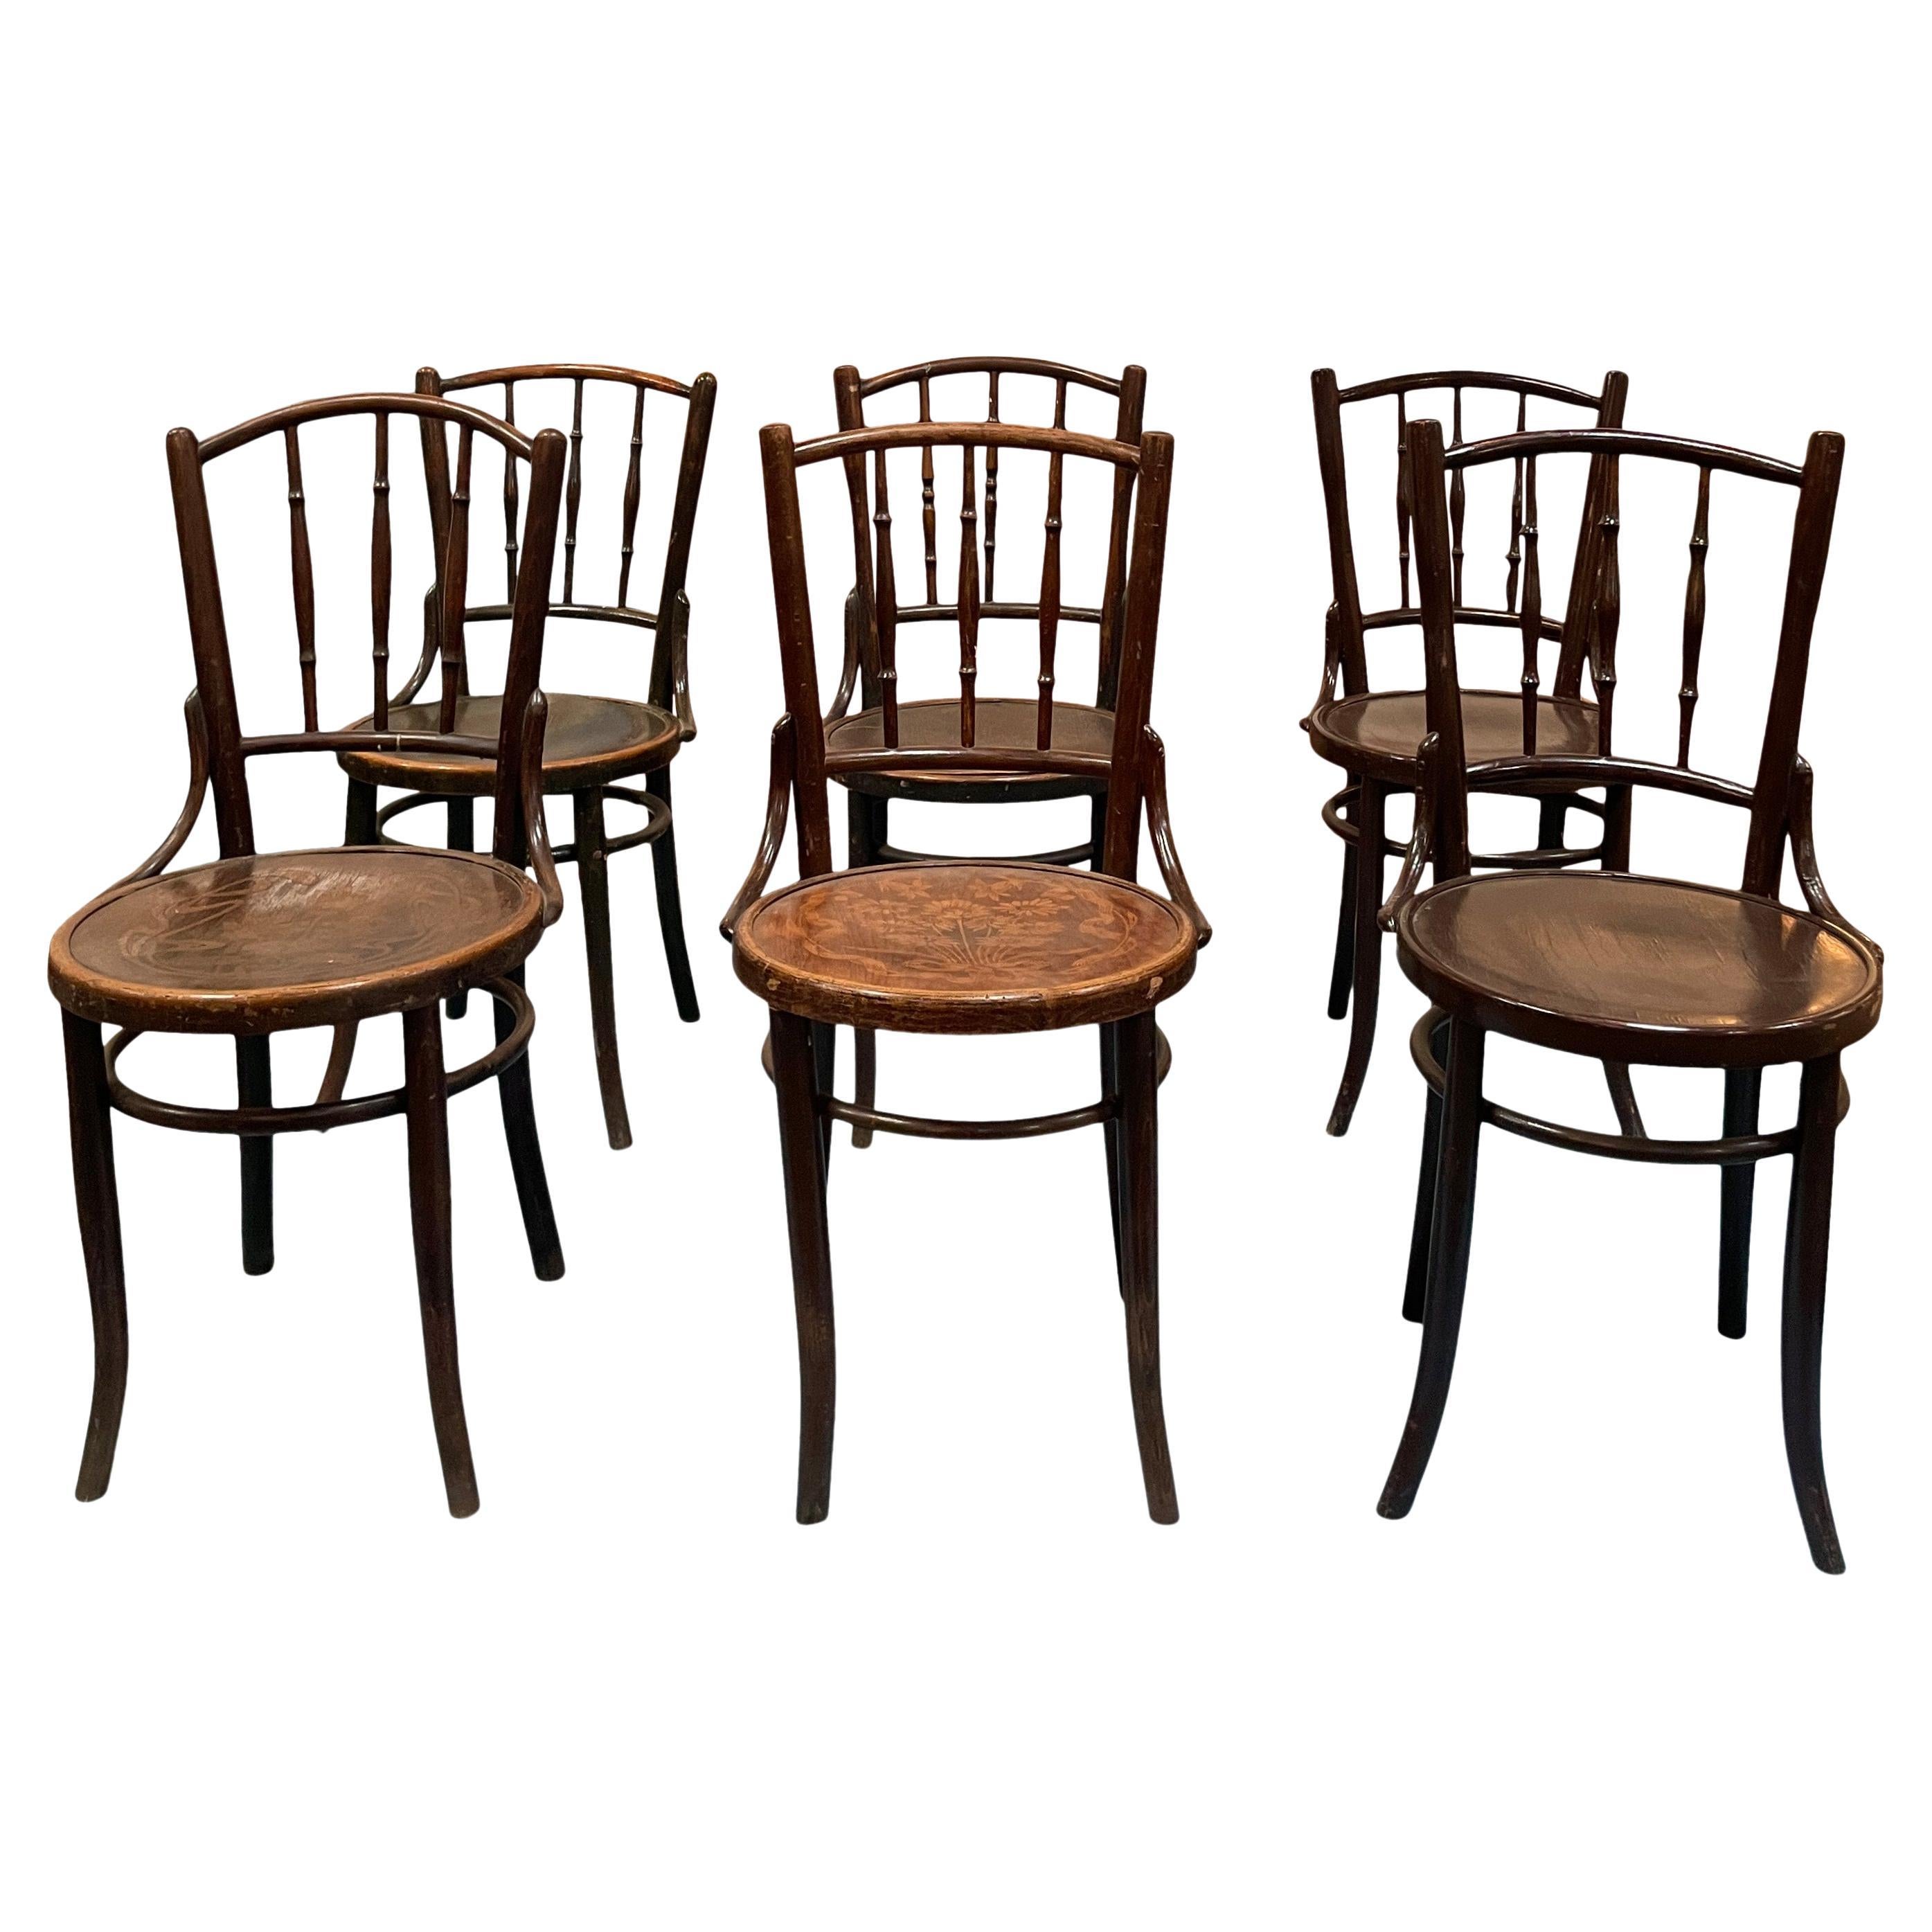 Set of 6 Vintage European Dining Chairs